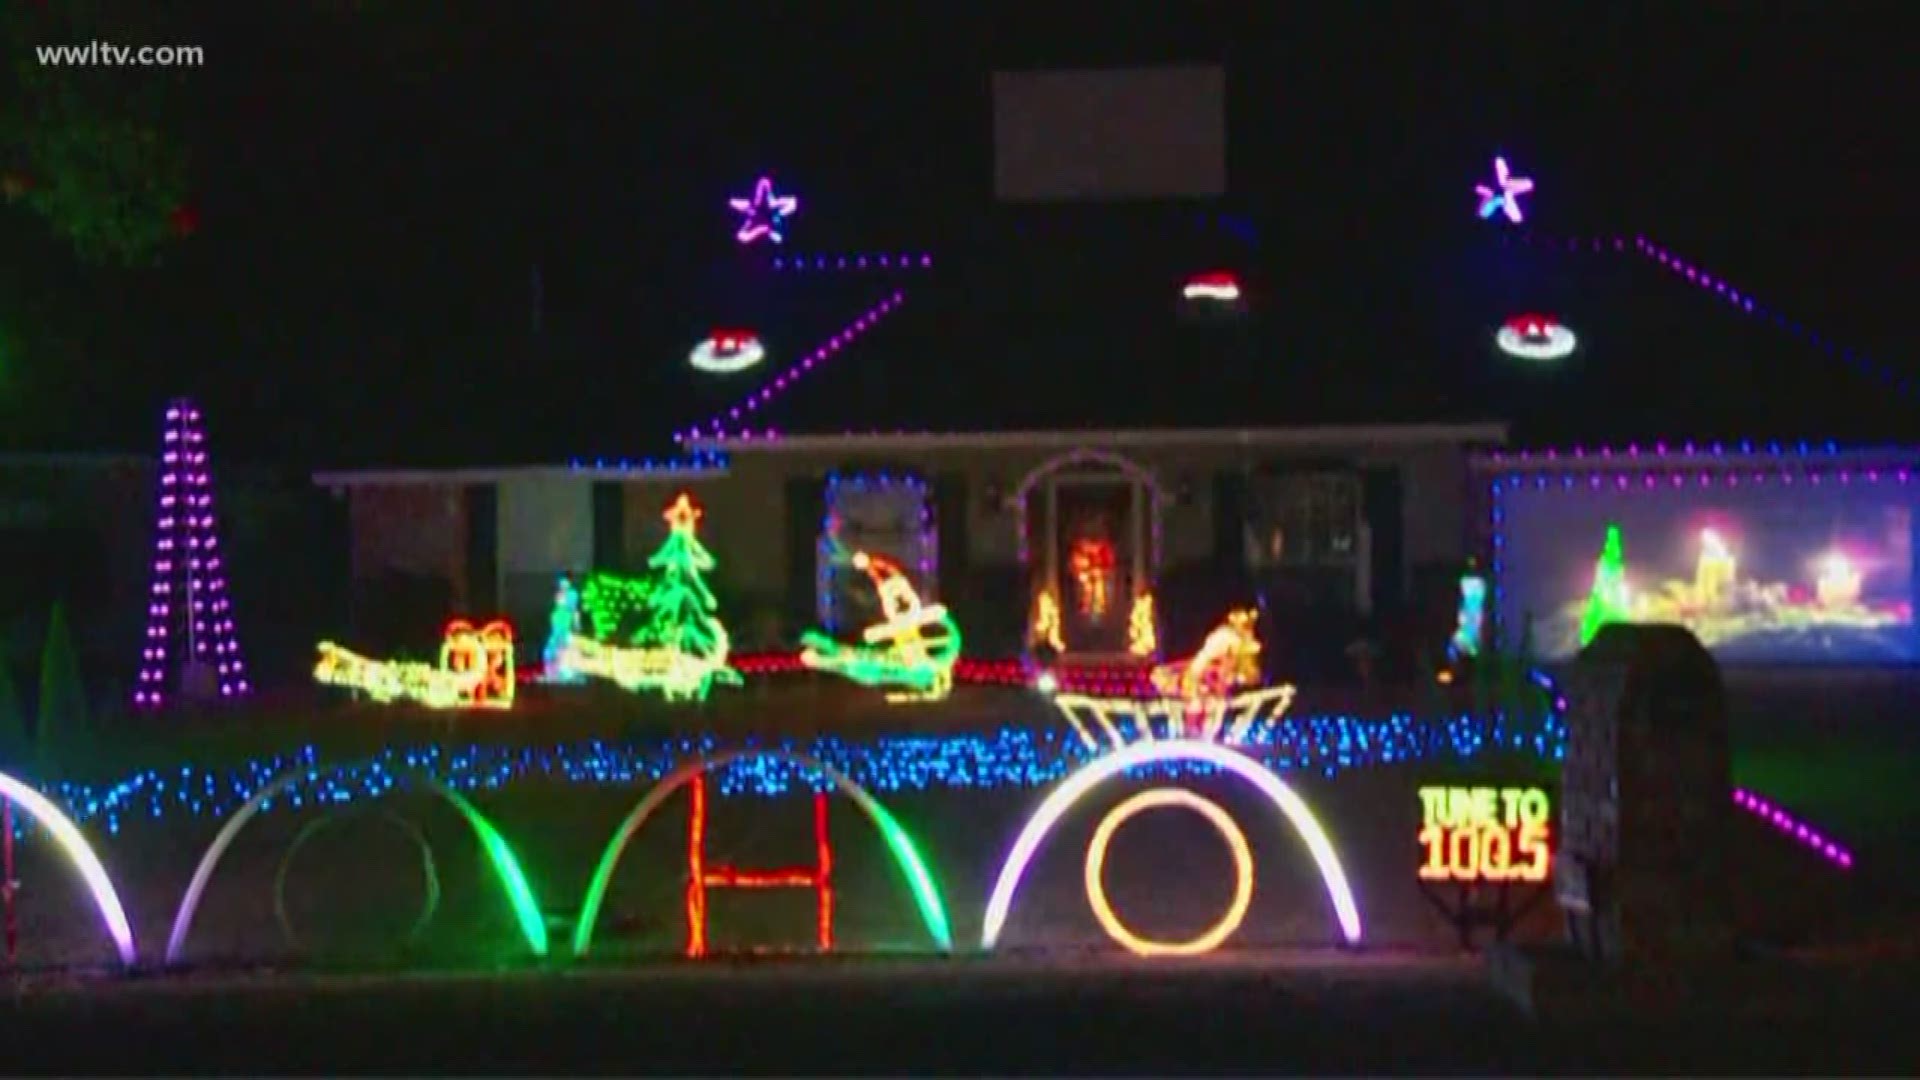 Chef Kevin is in search of some fantastic Christmas Light displays this holiday season.